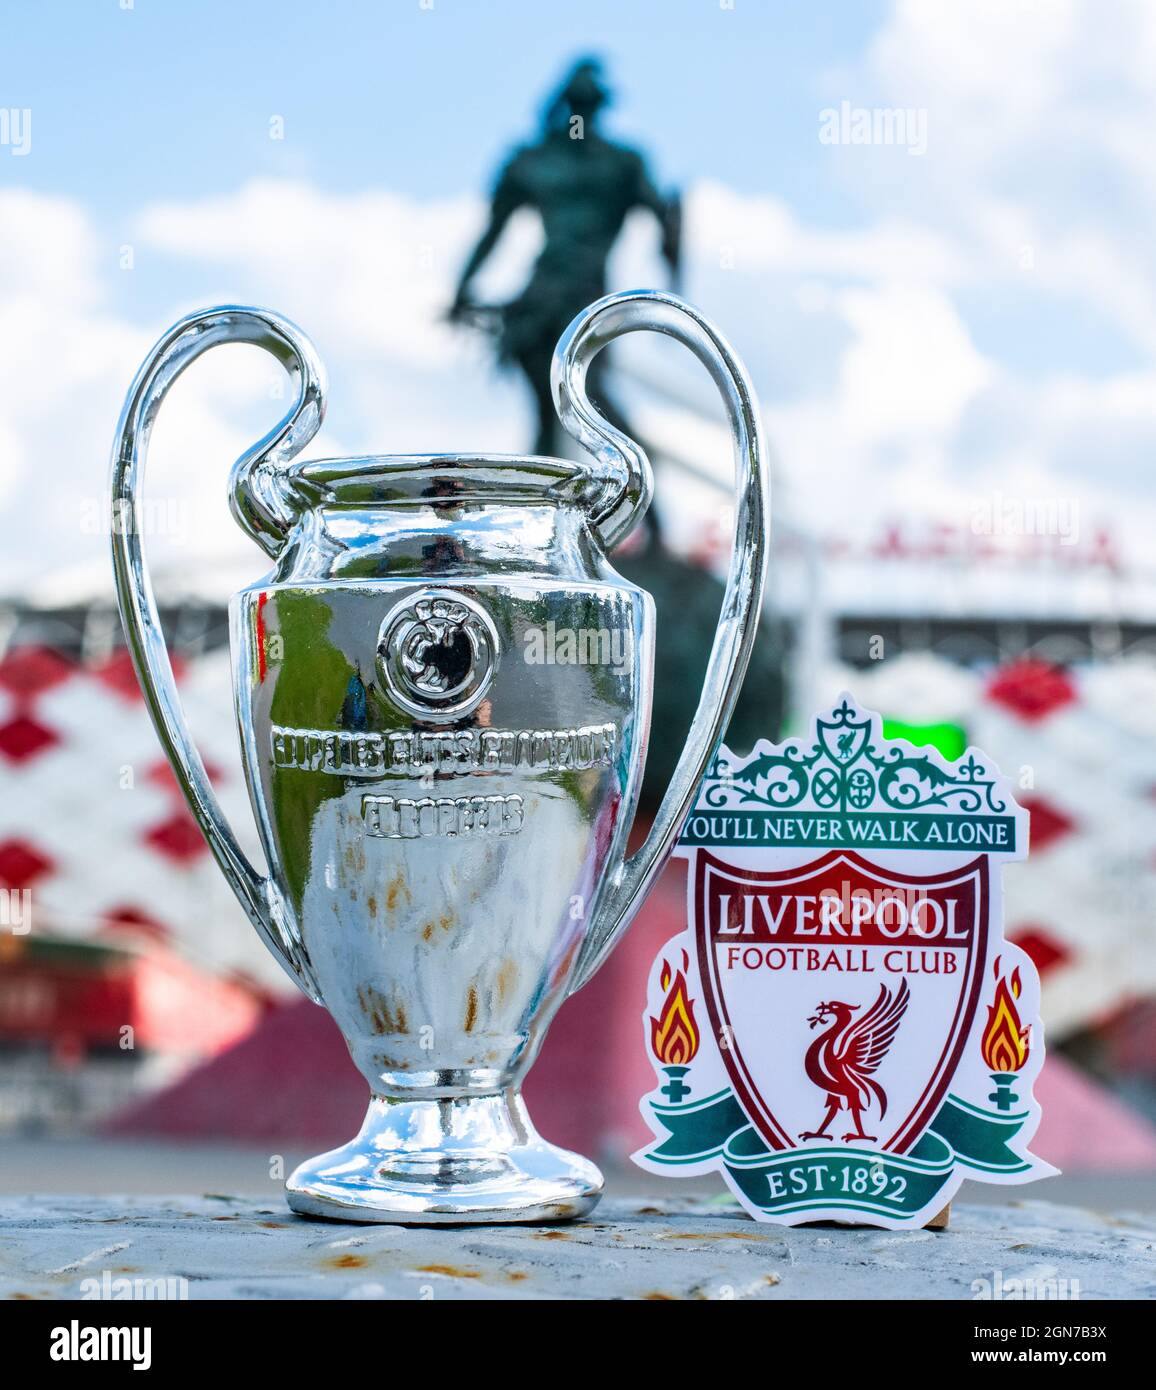 June 14, 2021 Liverpool, UK. Liverpool F.C. Football Club emblem and the UEFA Champions League Cup against the backdrop of a modern stadium. Stock Photo